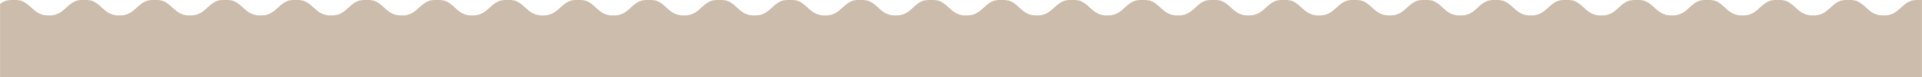 A green and beige background with a white triangle.